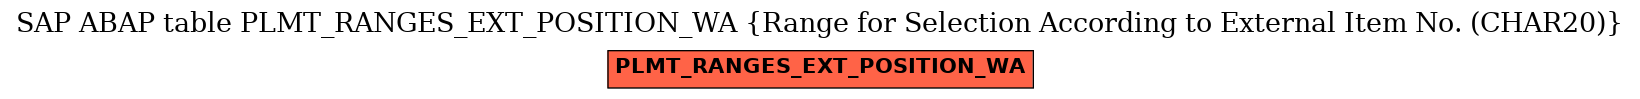 E-R Diagram for table PLMT_RANGES_EXT_POSITION_WA (Range for Selection According to External Item No. (CHAR20))